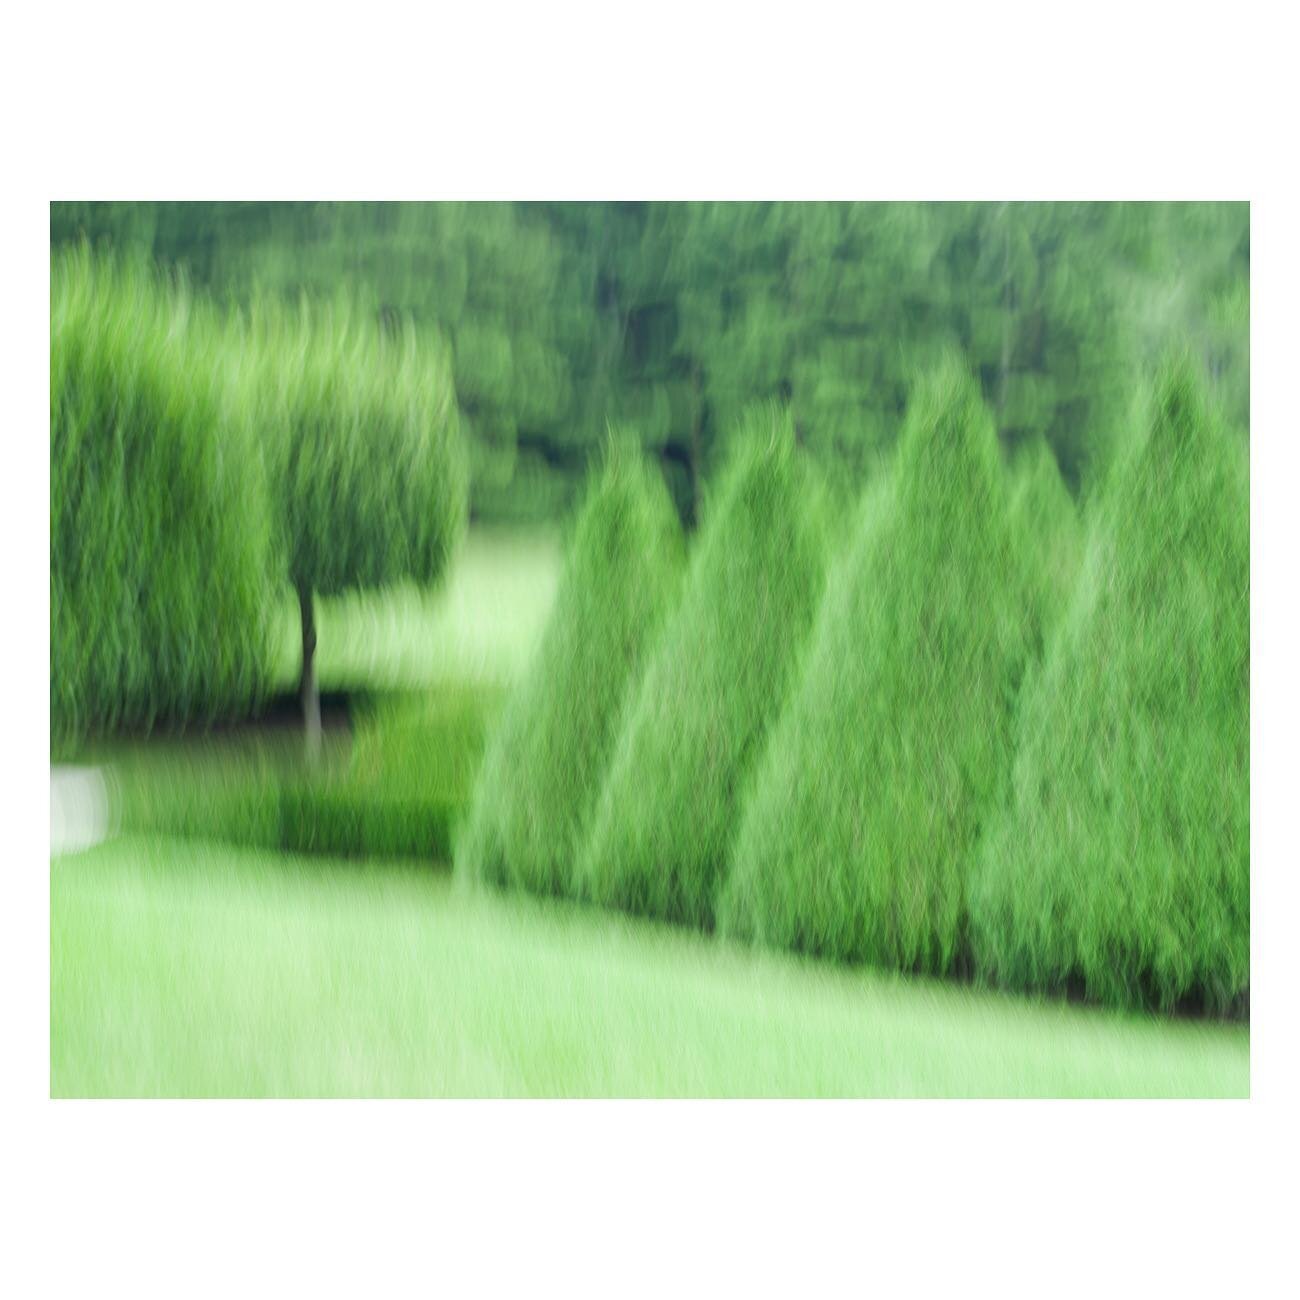 The Mount Arborvitaes, 2013. #tbt Calm and order meet energy and motion.
A singular &ldquo;Disturbed Paradise&rdquo; photograph that&rsquo;s not from my Fifty Acres project at Zez&eacute; and Peggy&rsquo;s farm. Although you can see the connection he